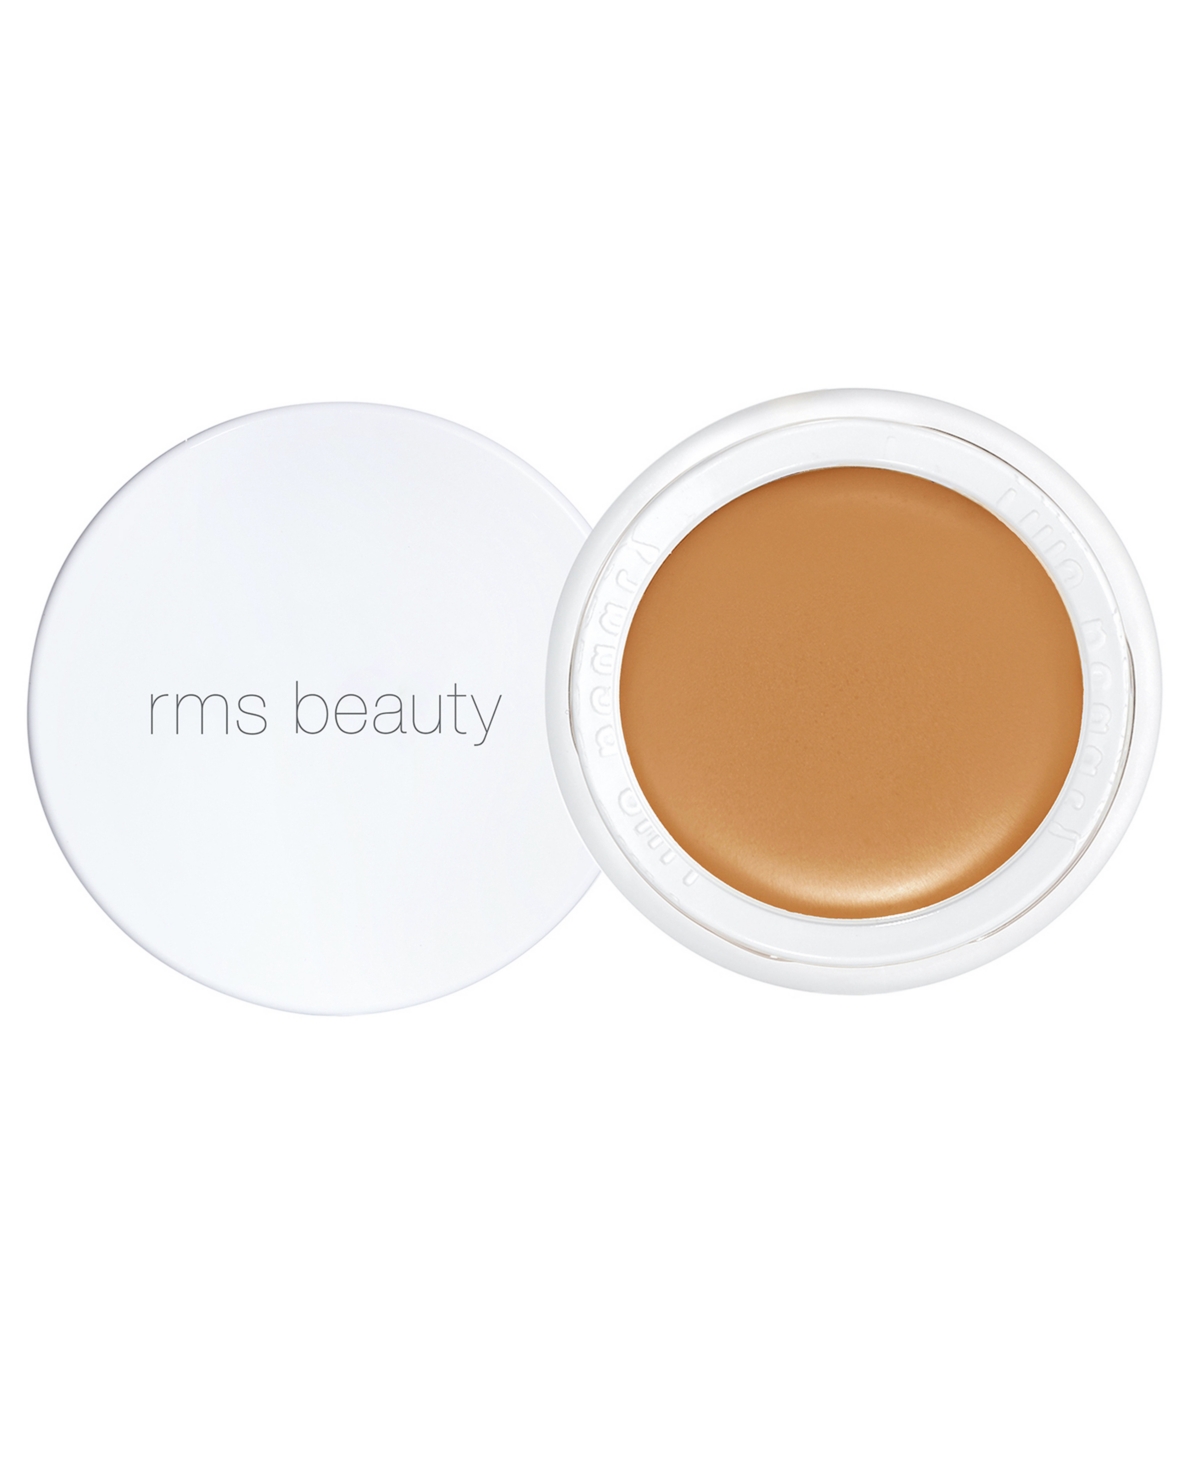 Rms Beauty Uncoverup Concealer In Tanned Amber For Olive Skin Tones